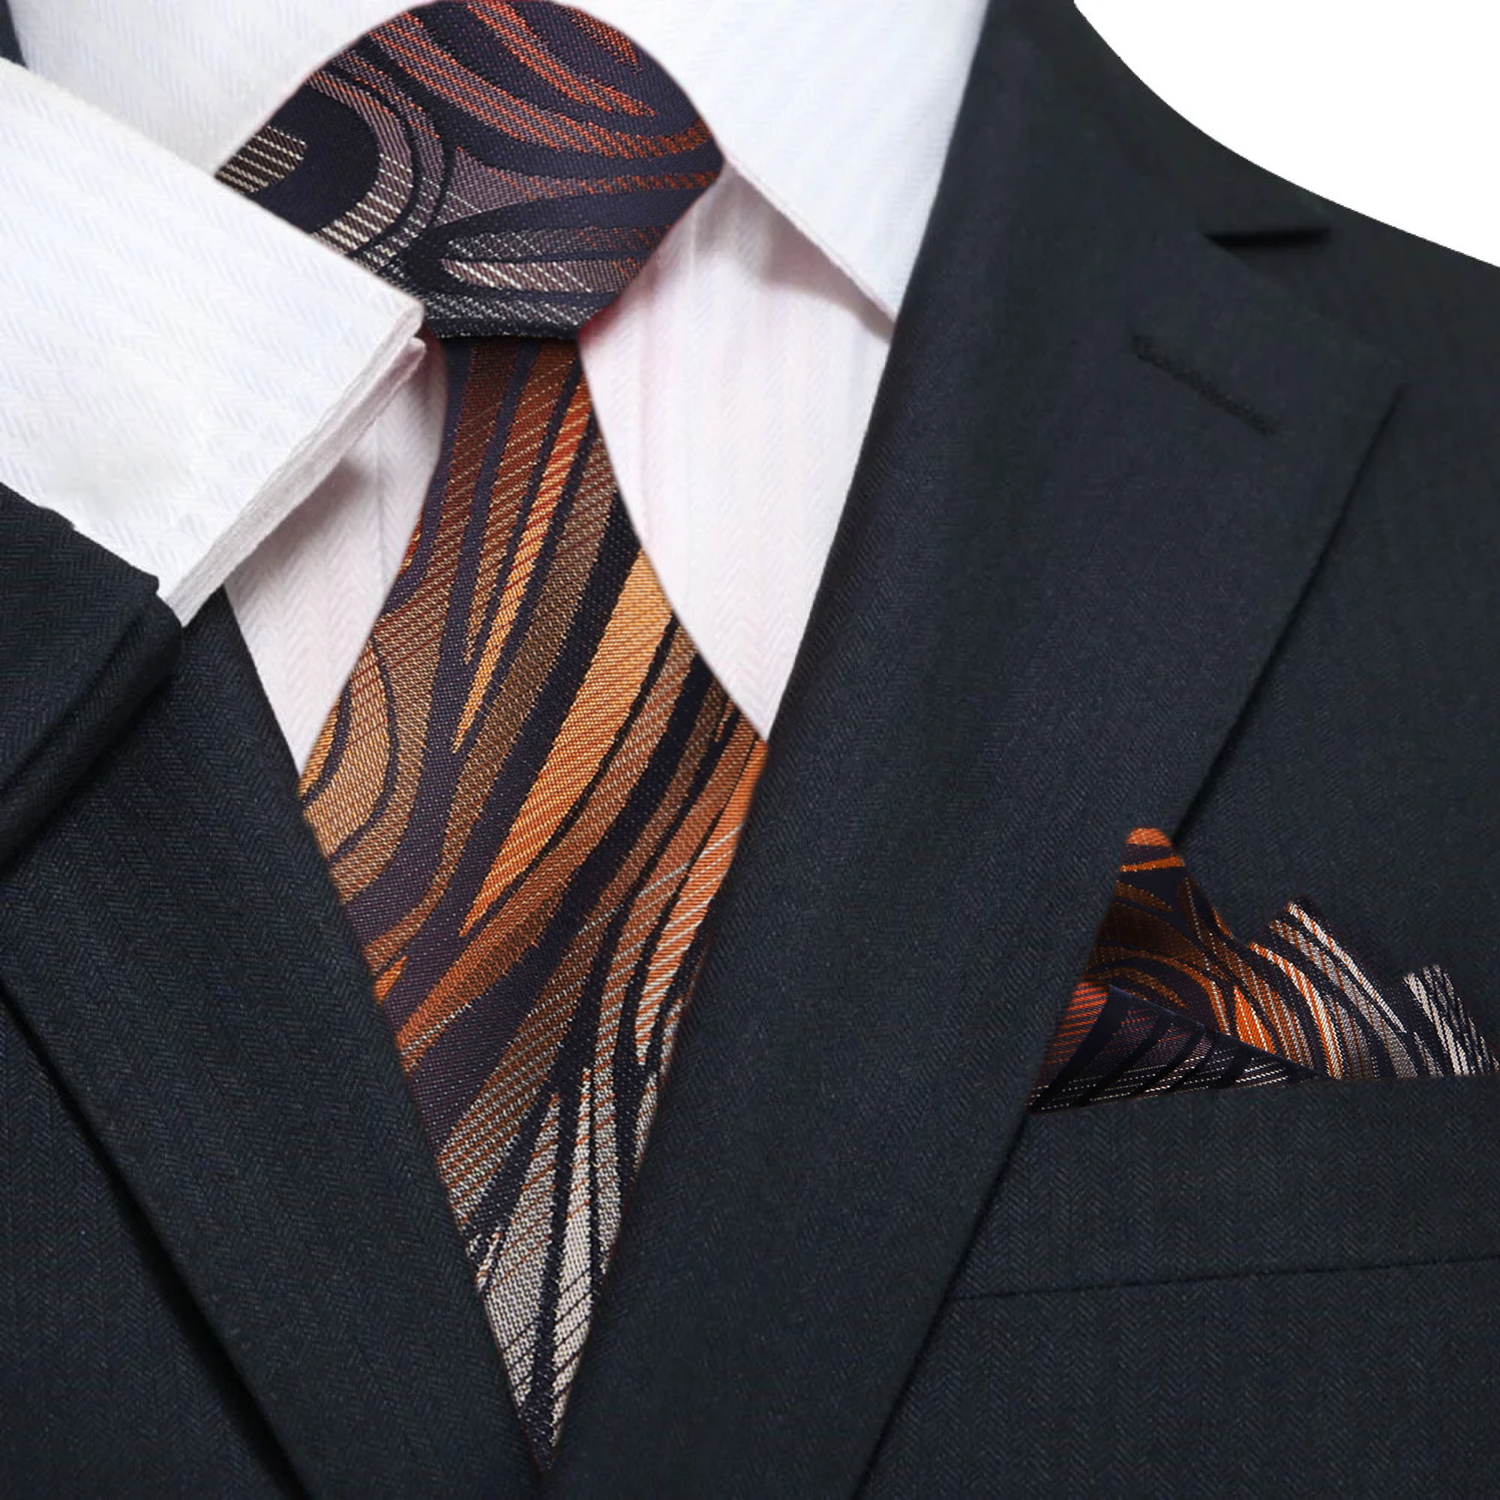 Main: Orange, Black, Grey Abstract Tie and Matching Square